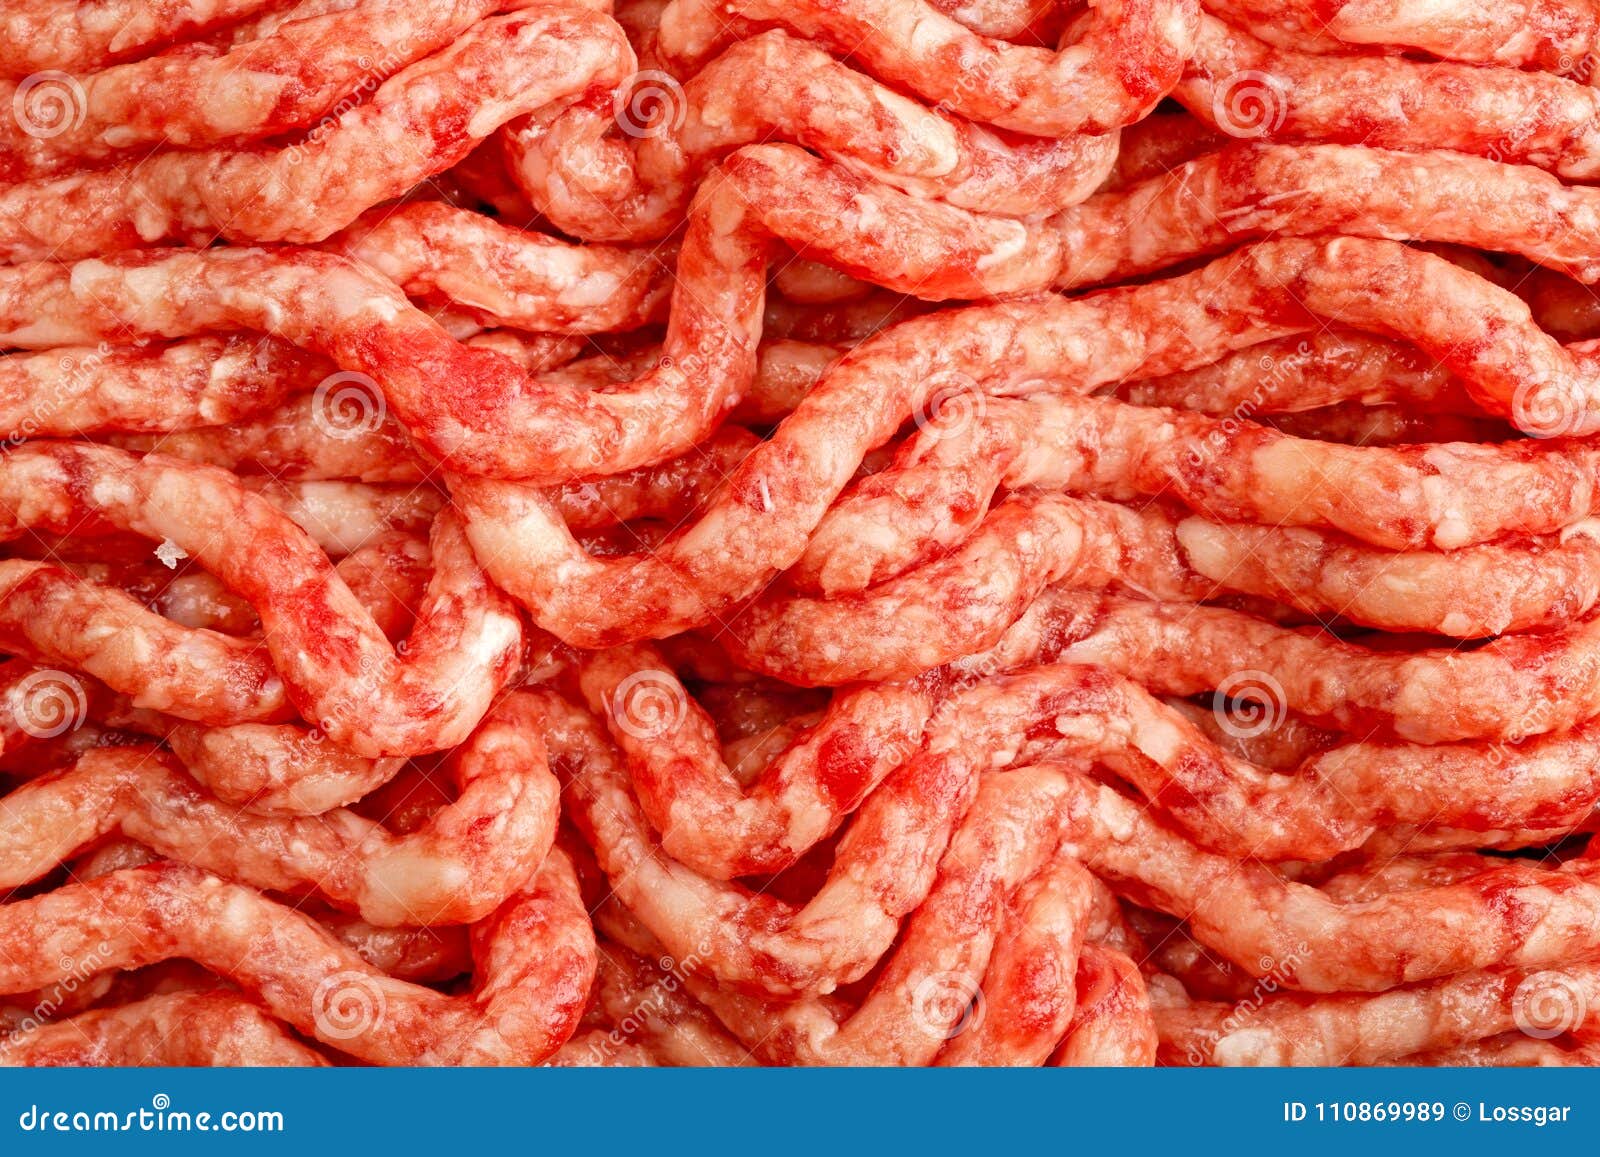 Minced Meat Seamless Pattern Stock Image - Image of healthy, repeat:  110869989